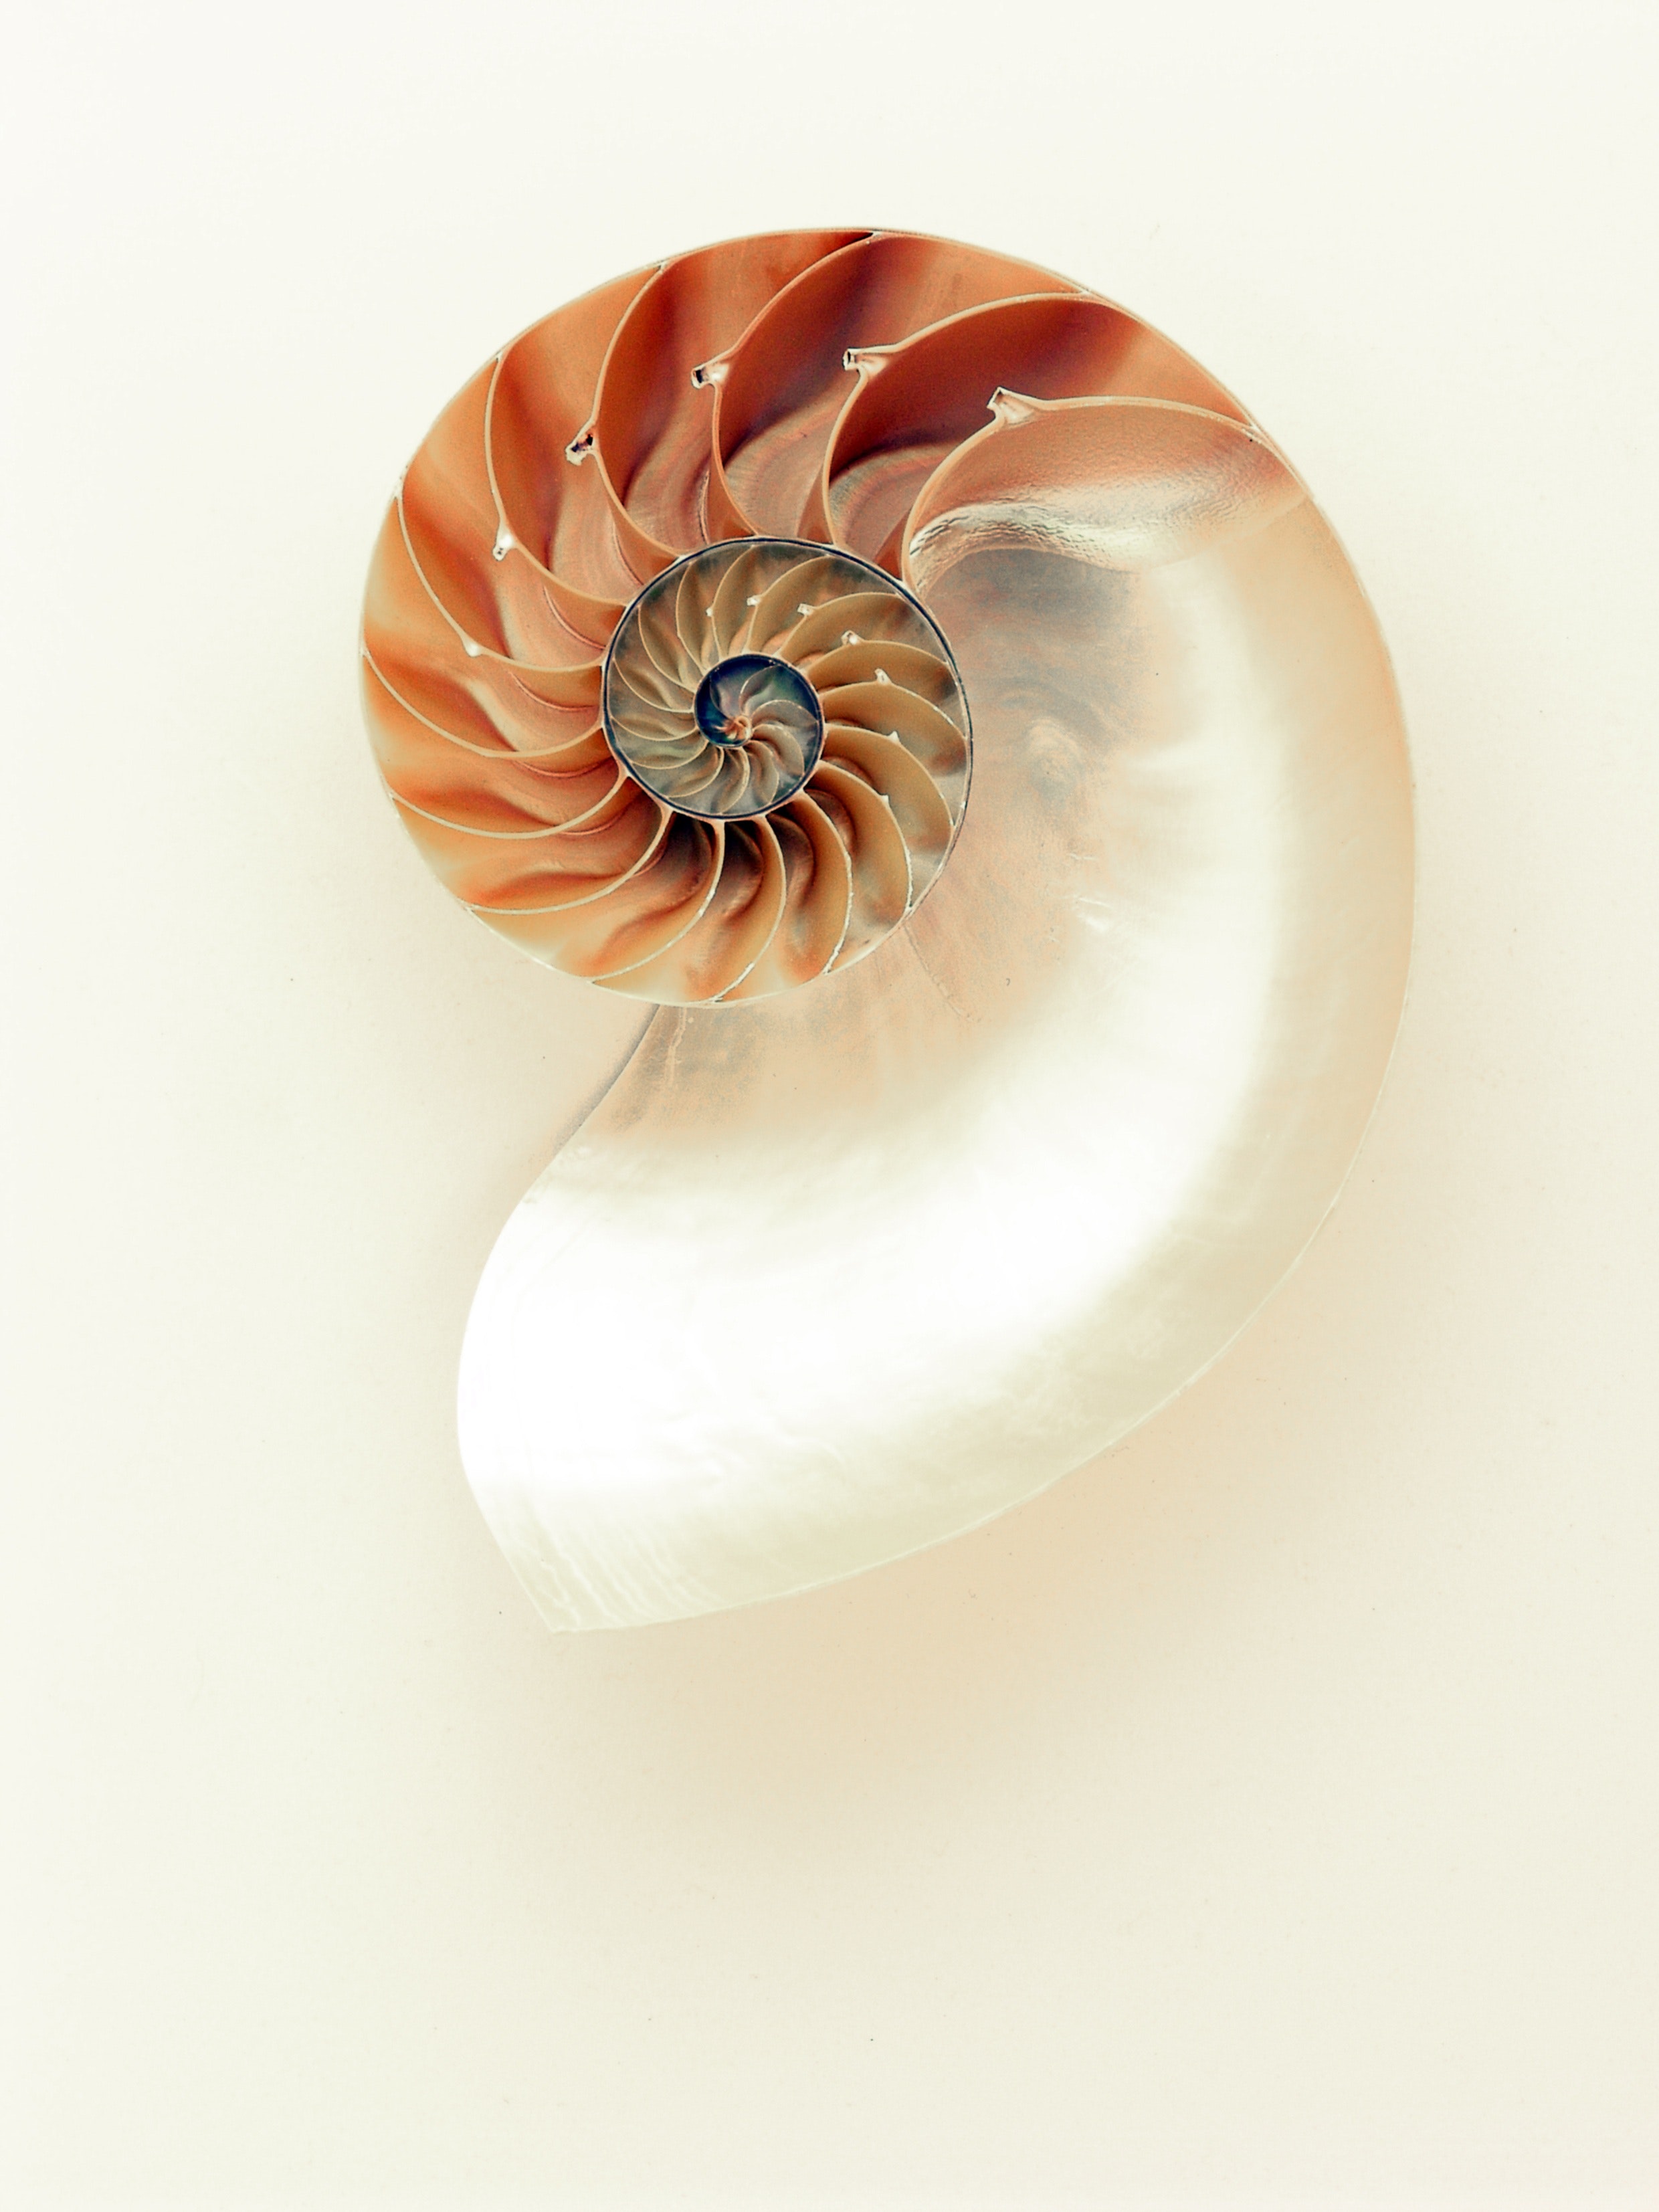 Picture of a Nautilus shell